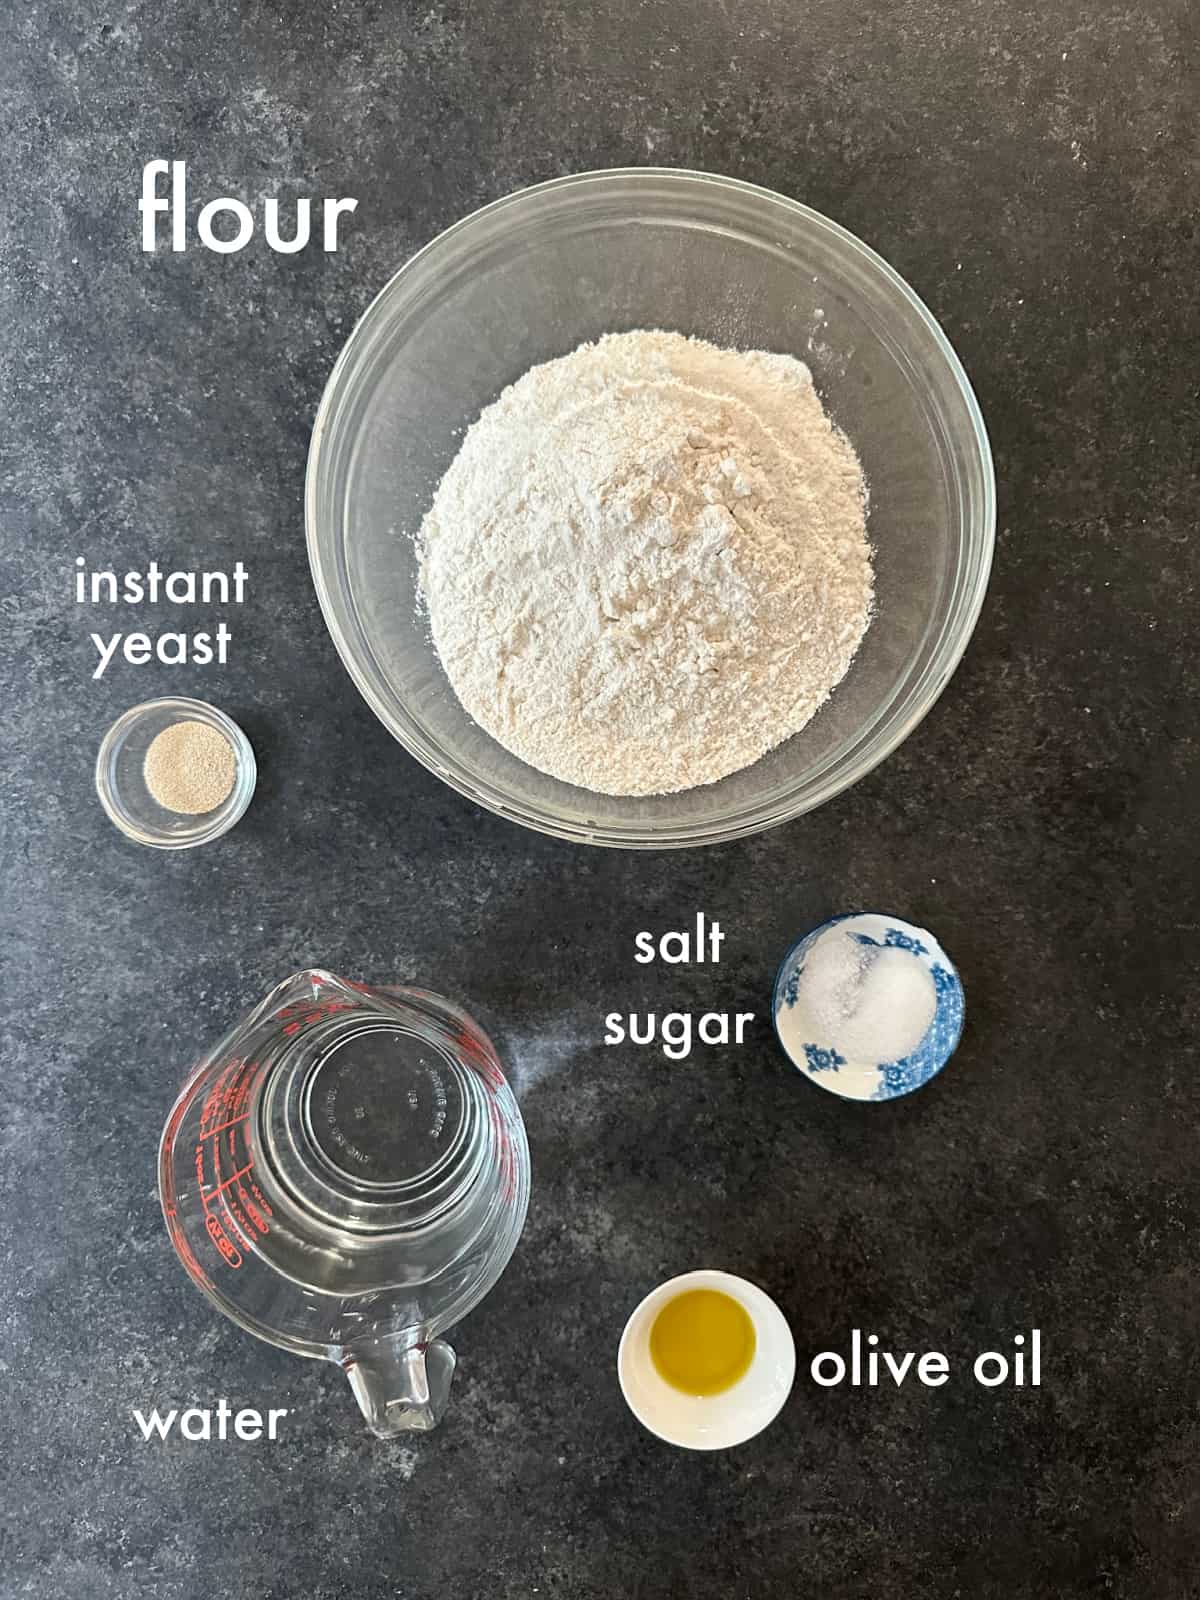 To make this recipe you need flour, salt, sugar, yeast, water and olive oil. 